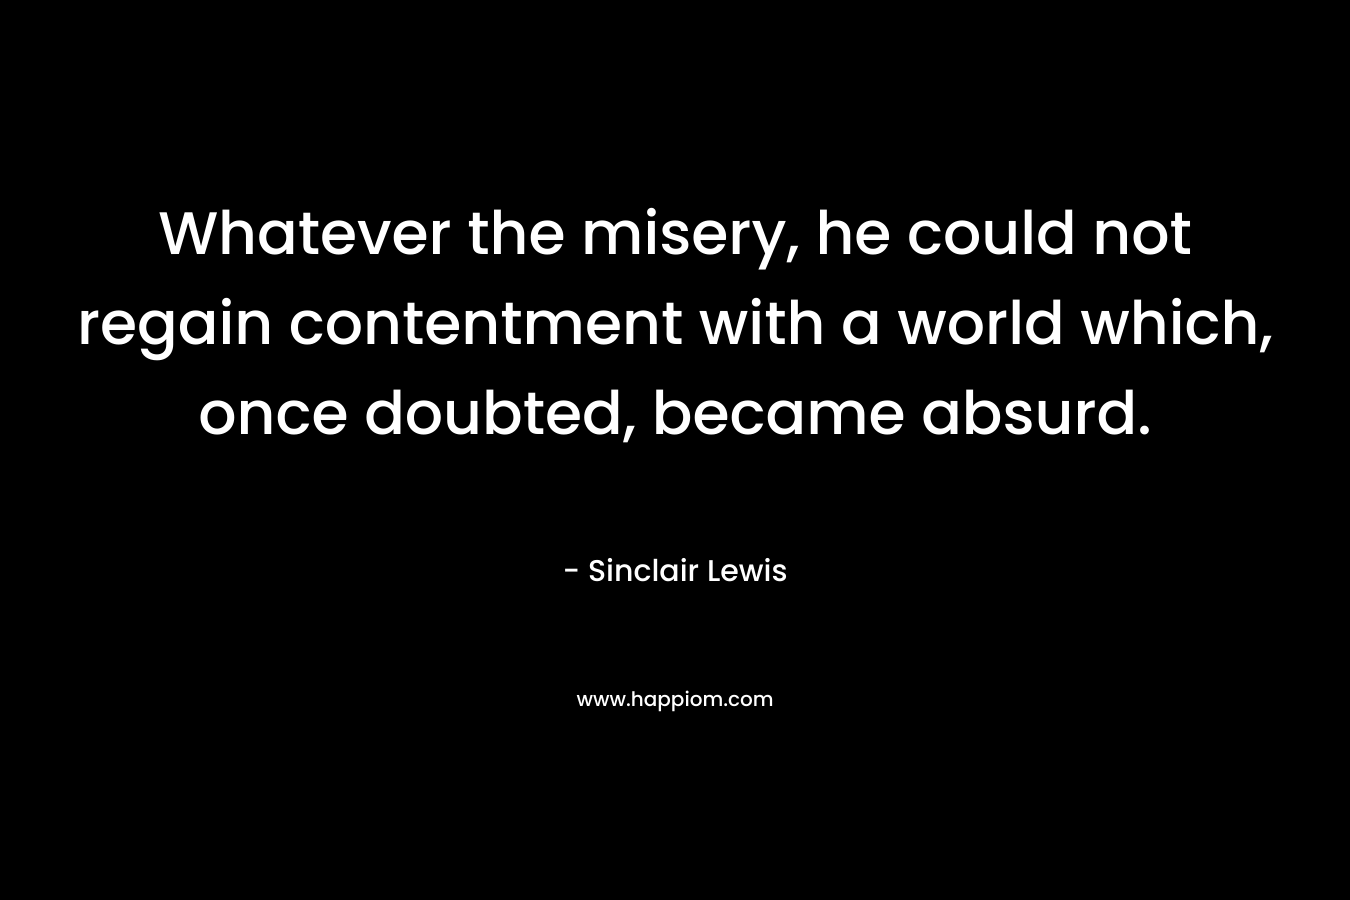 Whatever the misery, he could not regain contentment with a world which, once doubted, became absurd. – Sinclair Lewis